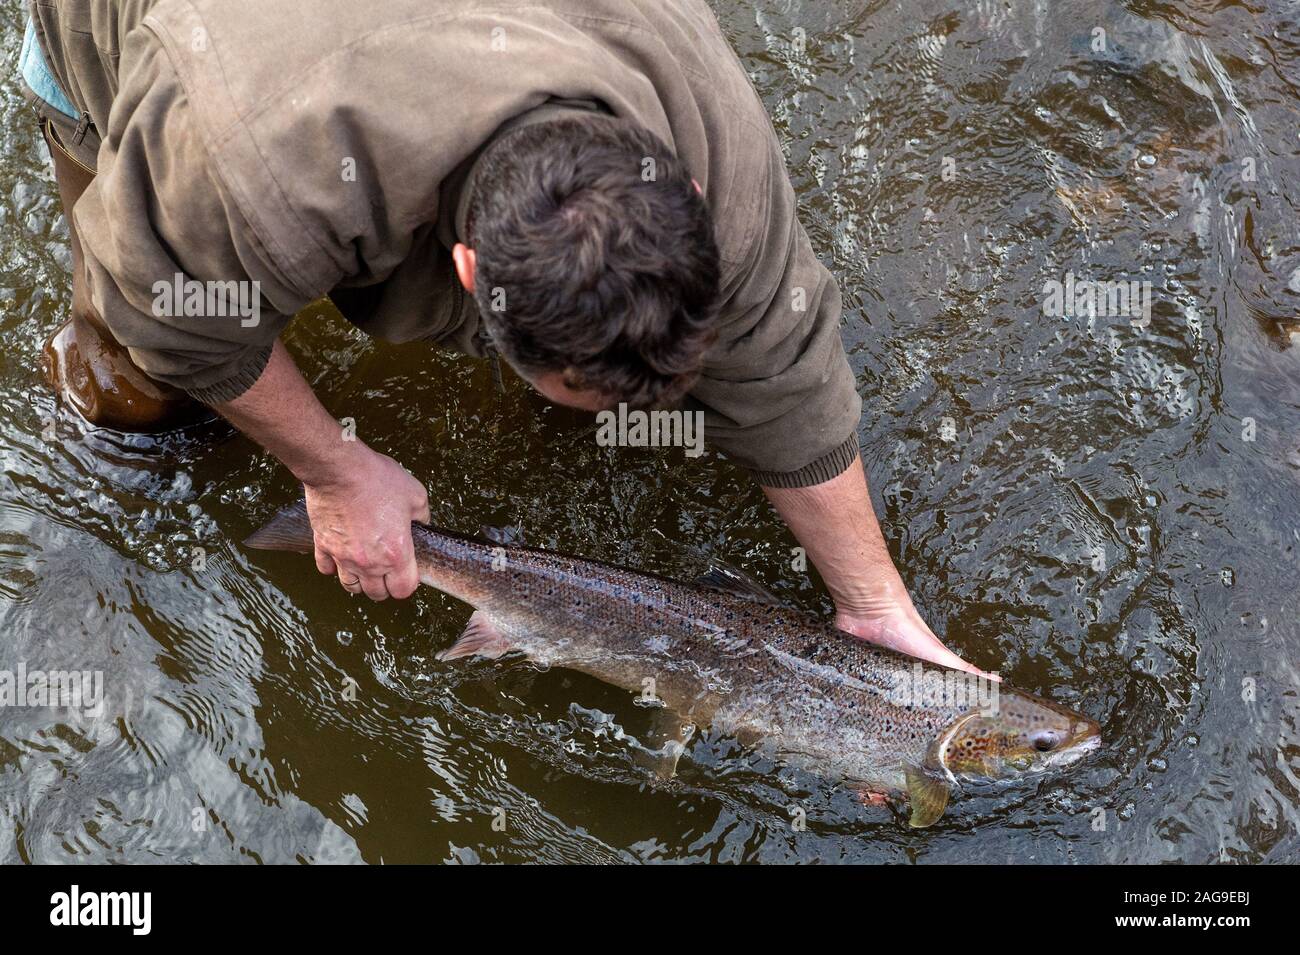 18 December 2019, Saxony-Anhalt, Nutha: Steffen Zahn, project manager of the Migratory Fish Programme Saxony-Anhalt of the Institute for Inland Fisheries in Potsdam, puts a 4 kilo female salmon back into the water in the Nuthe. The fish had been caught and examined during the trial fishing on the Nuthe. There the animal was released 3 to 4 years ago what the fishermen noticed at a mark on the pelvic fin. In the meantime, the salmon had swum as far as the Atlantic and has now returned to the Nuthe for spawning. In the Nuthe a total of 143500 young salmon and 90300 sea trout hatchlings have been Stock Photo